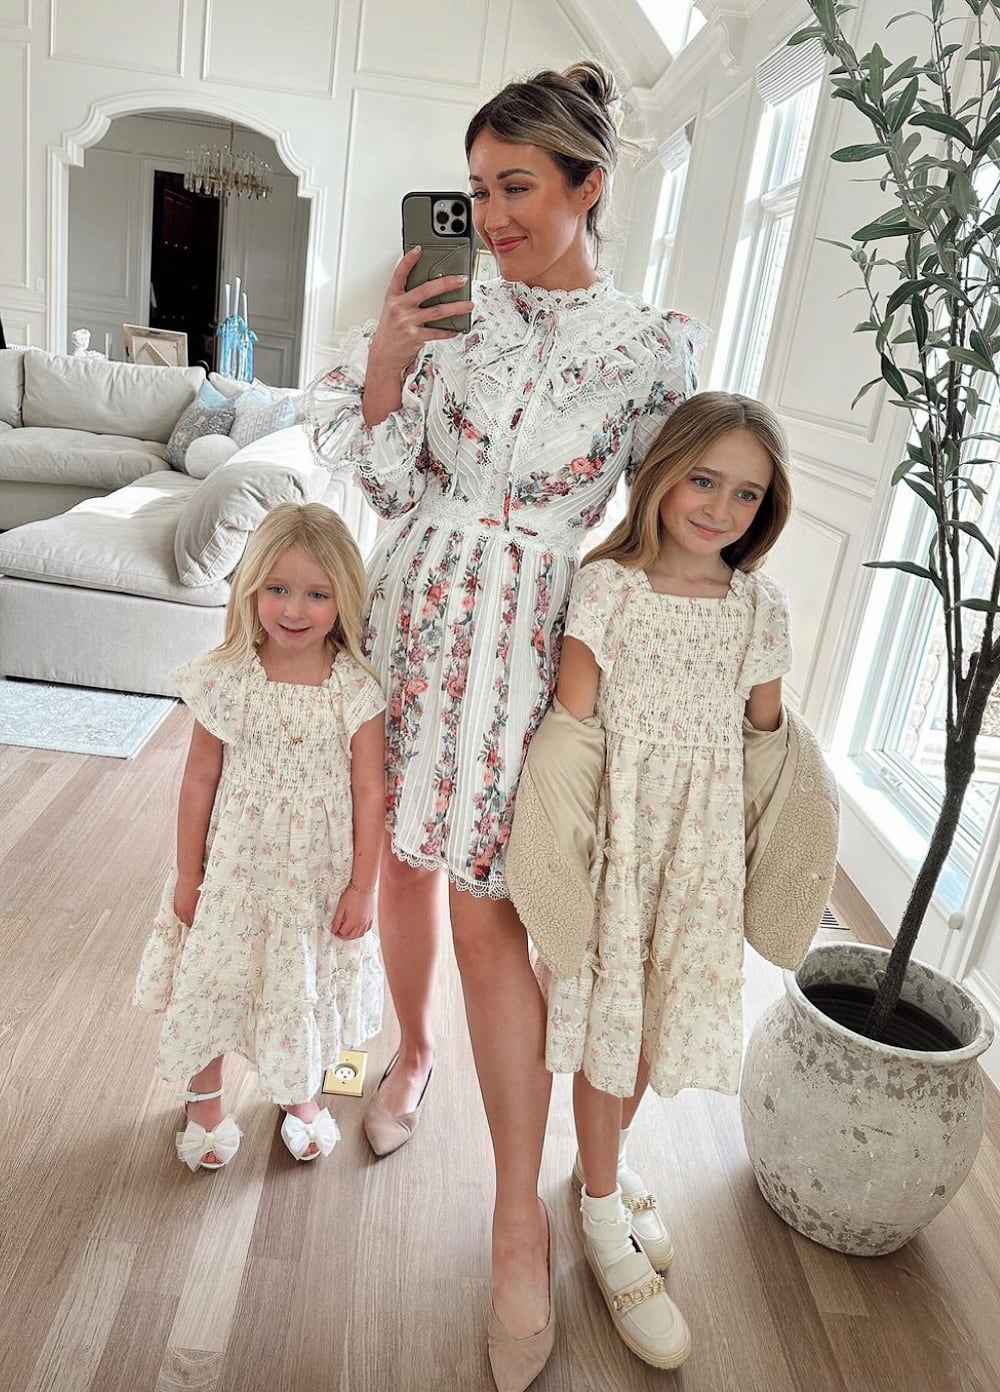 Woman and two daughters wearing white and floral Easter dresses.